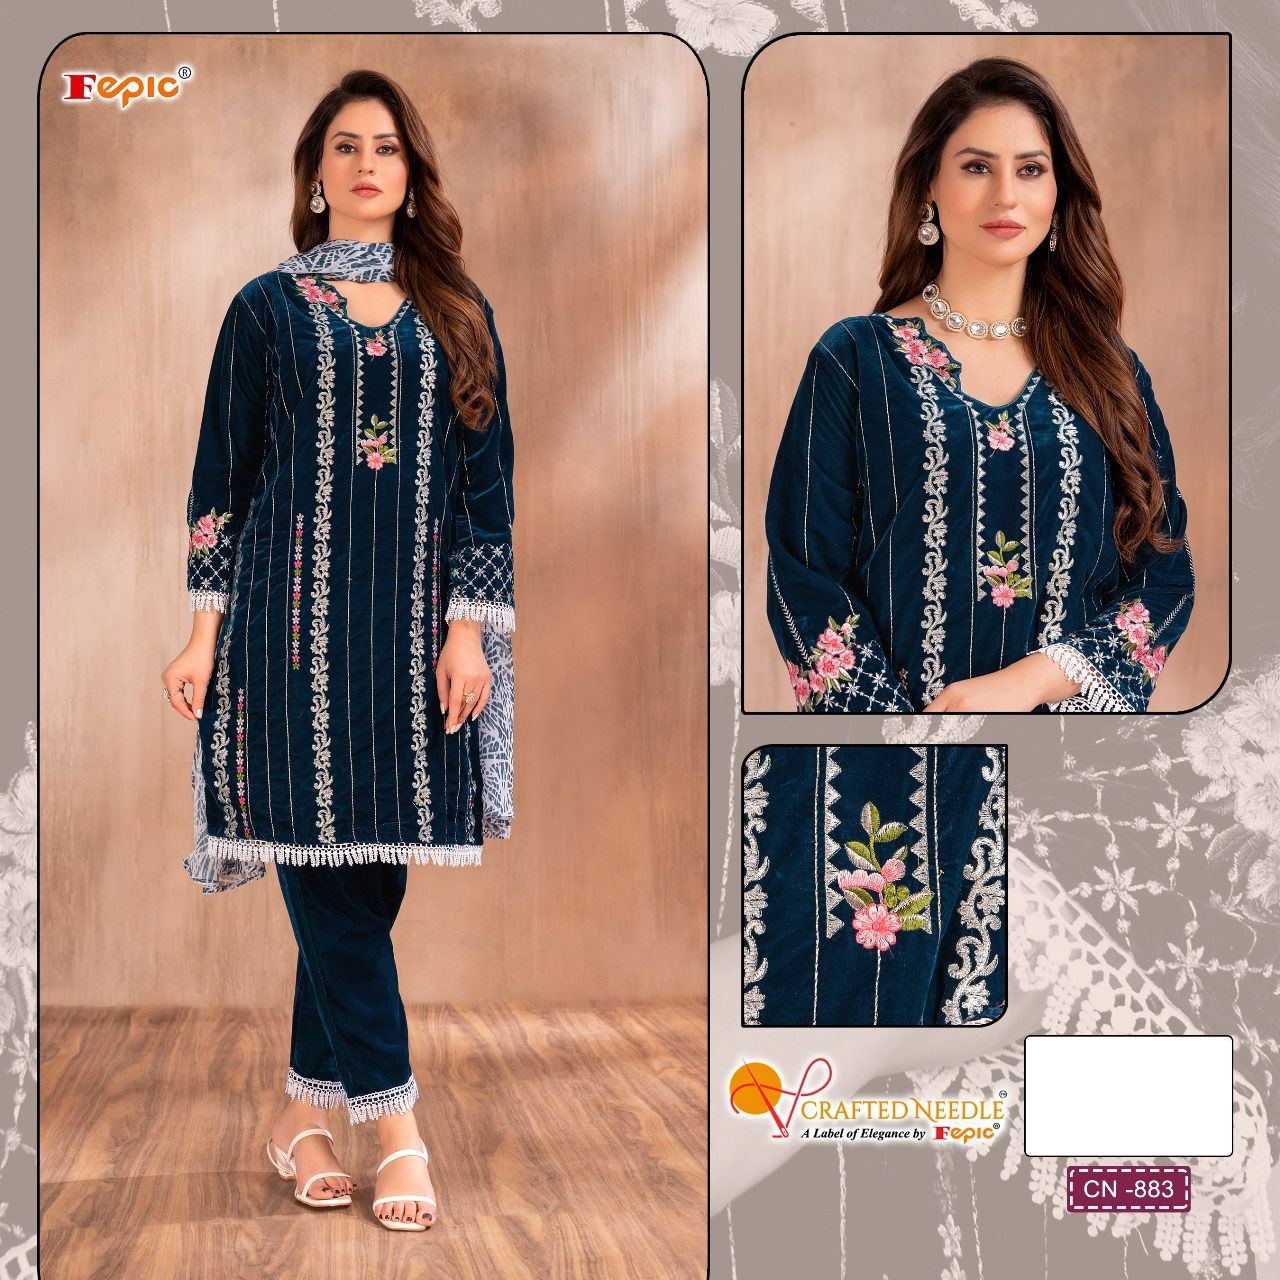 FEPIC CN 883 CRAFTED NEEDLE READYMADE SALWAR SUITS